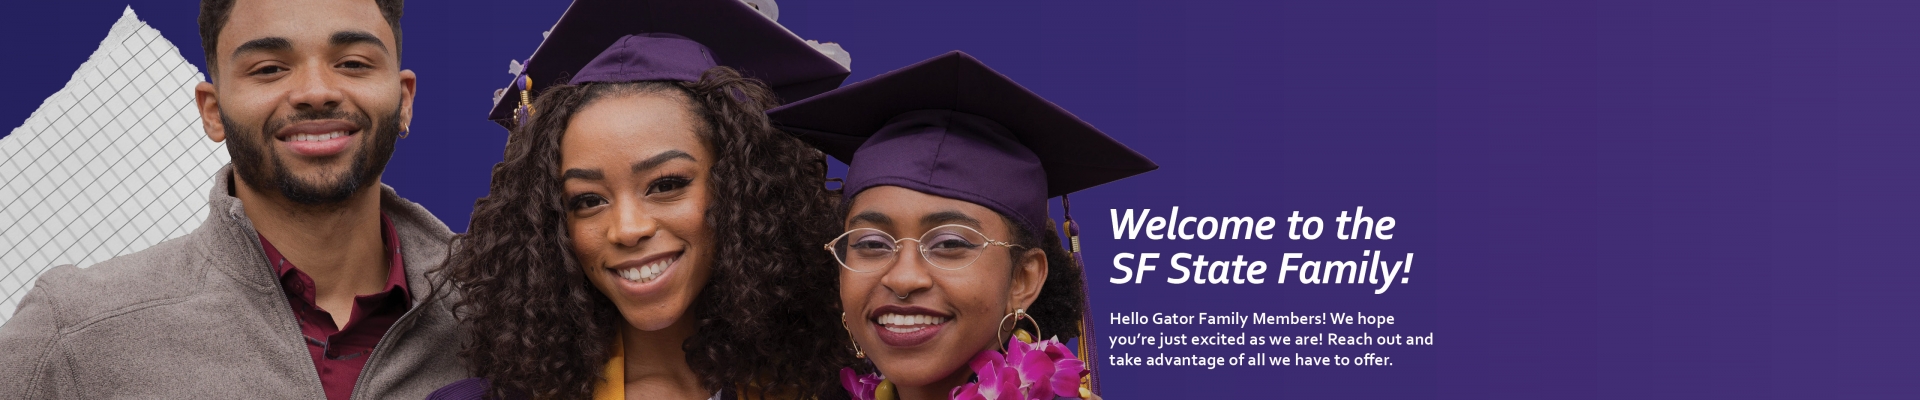 Welcome to the SF State Family! Reach out and take advantage of all we have to offer.